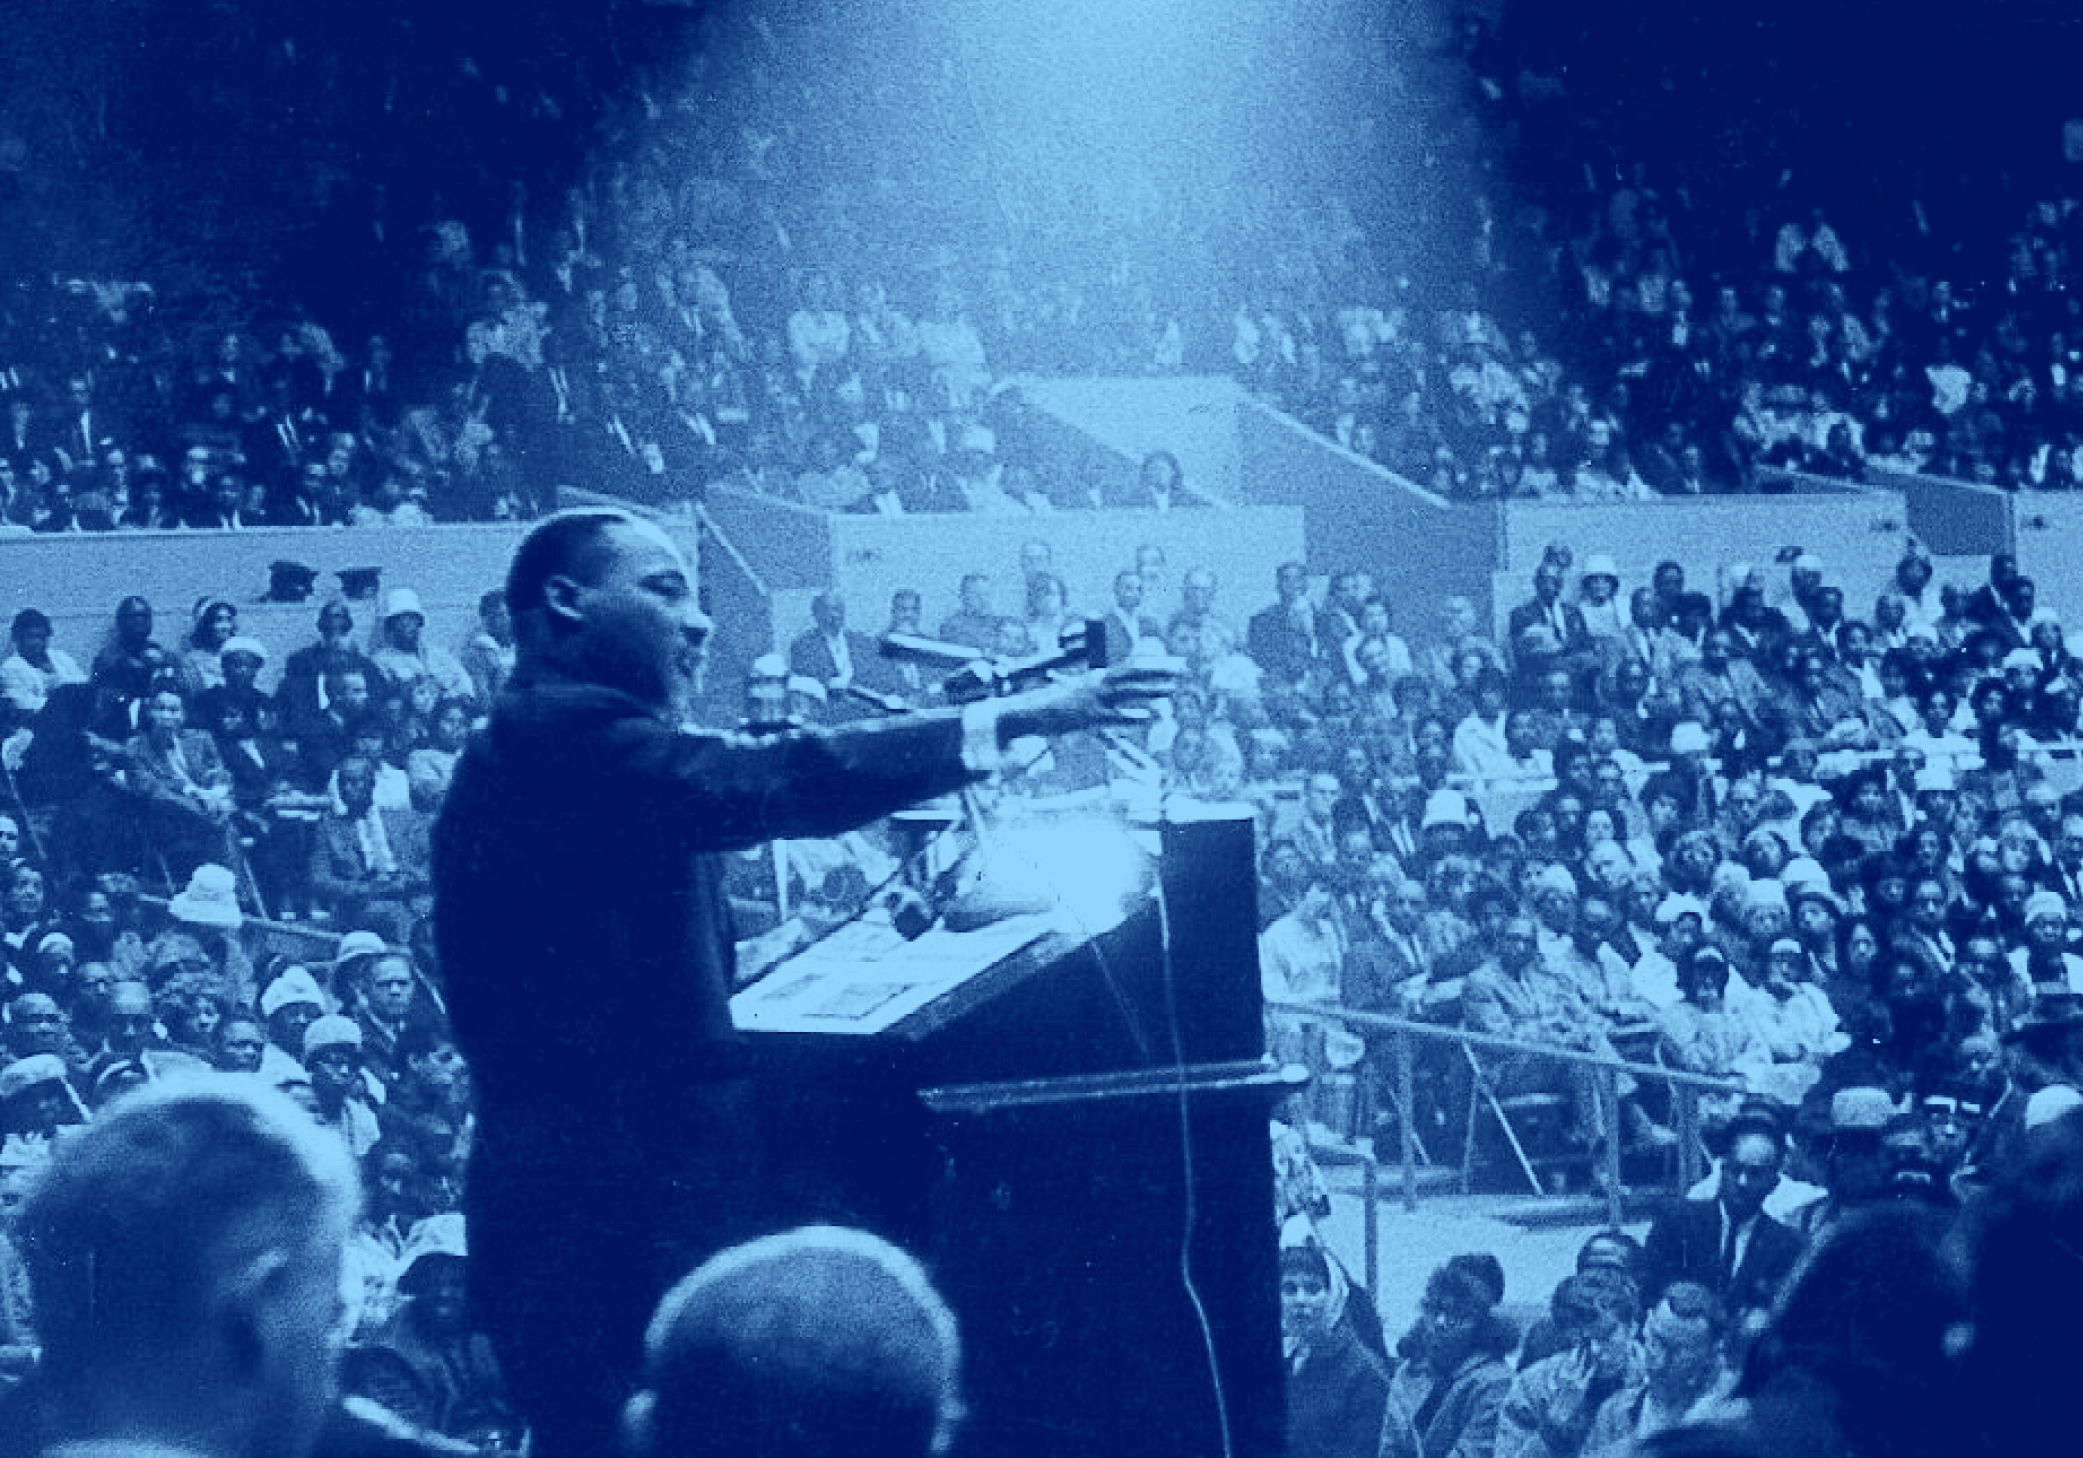 Top 16 Most Powerful Martin Luther King Jr. Quotes